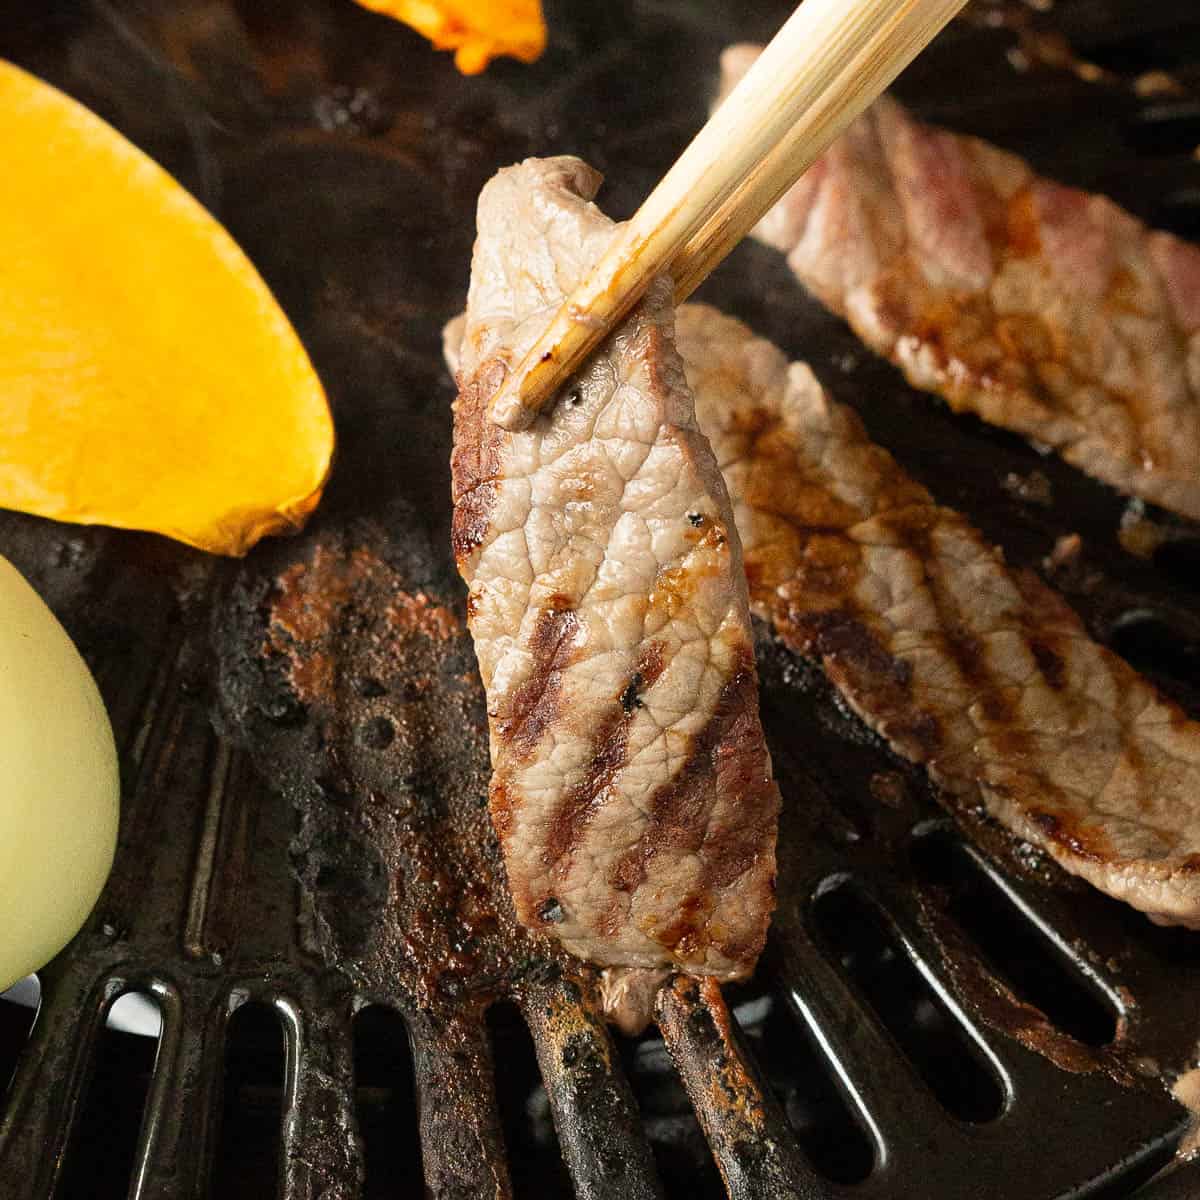 A thin slice of beef with grill marks being picked up by chopsticks.